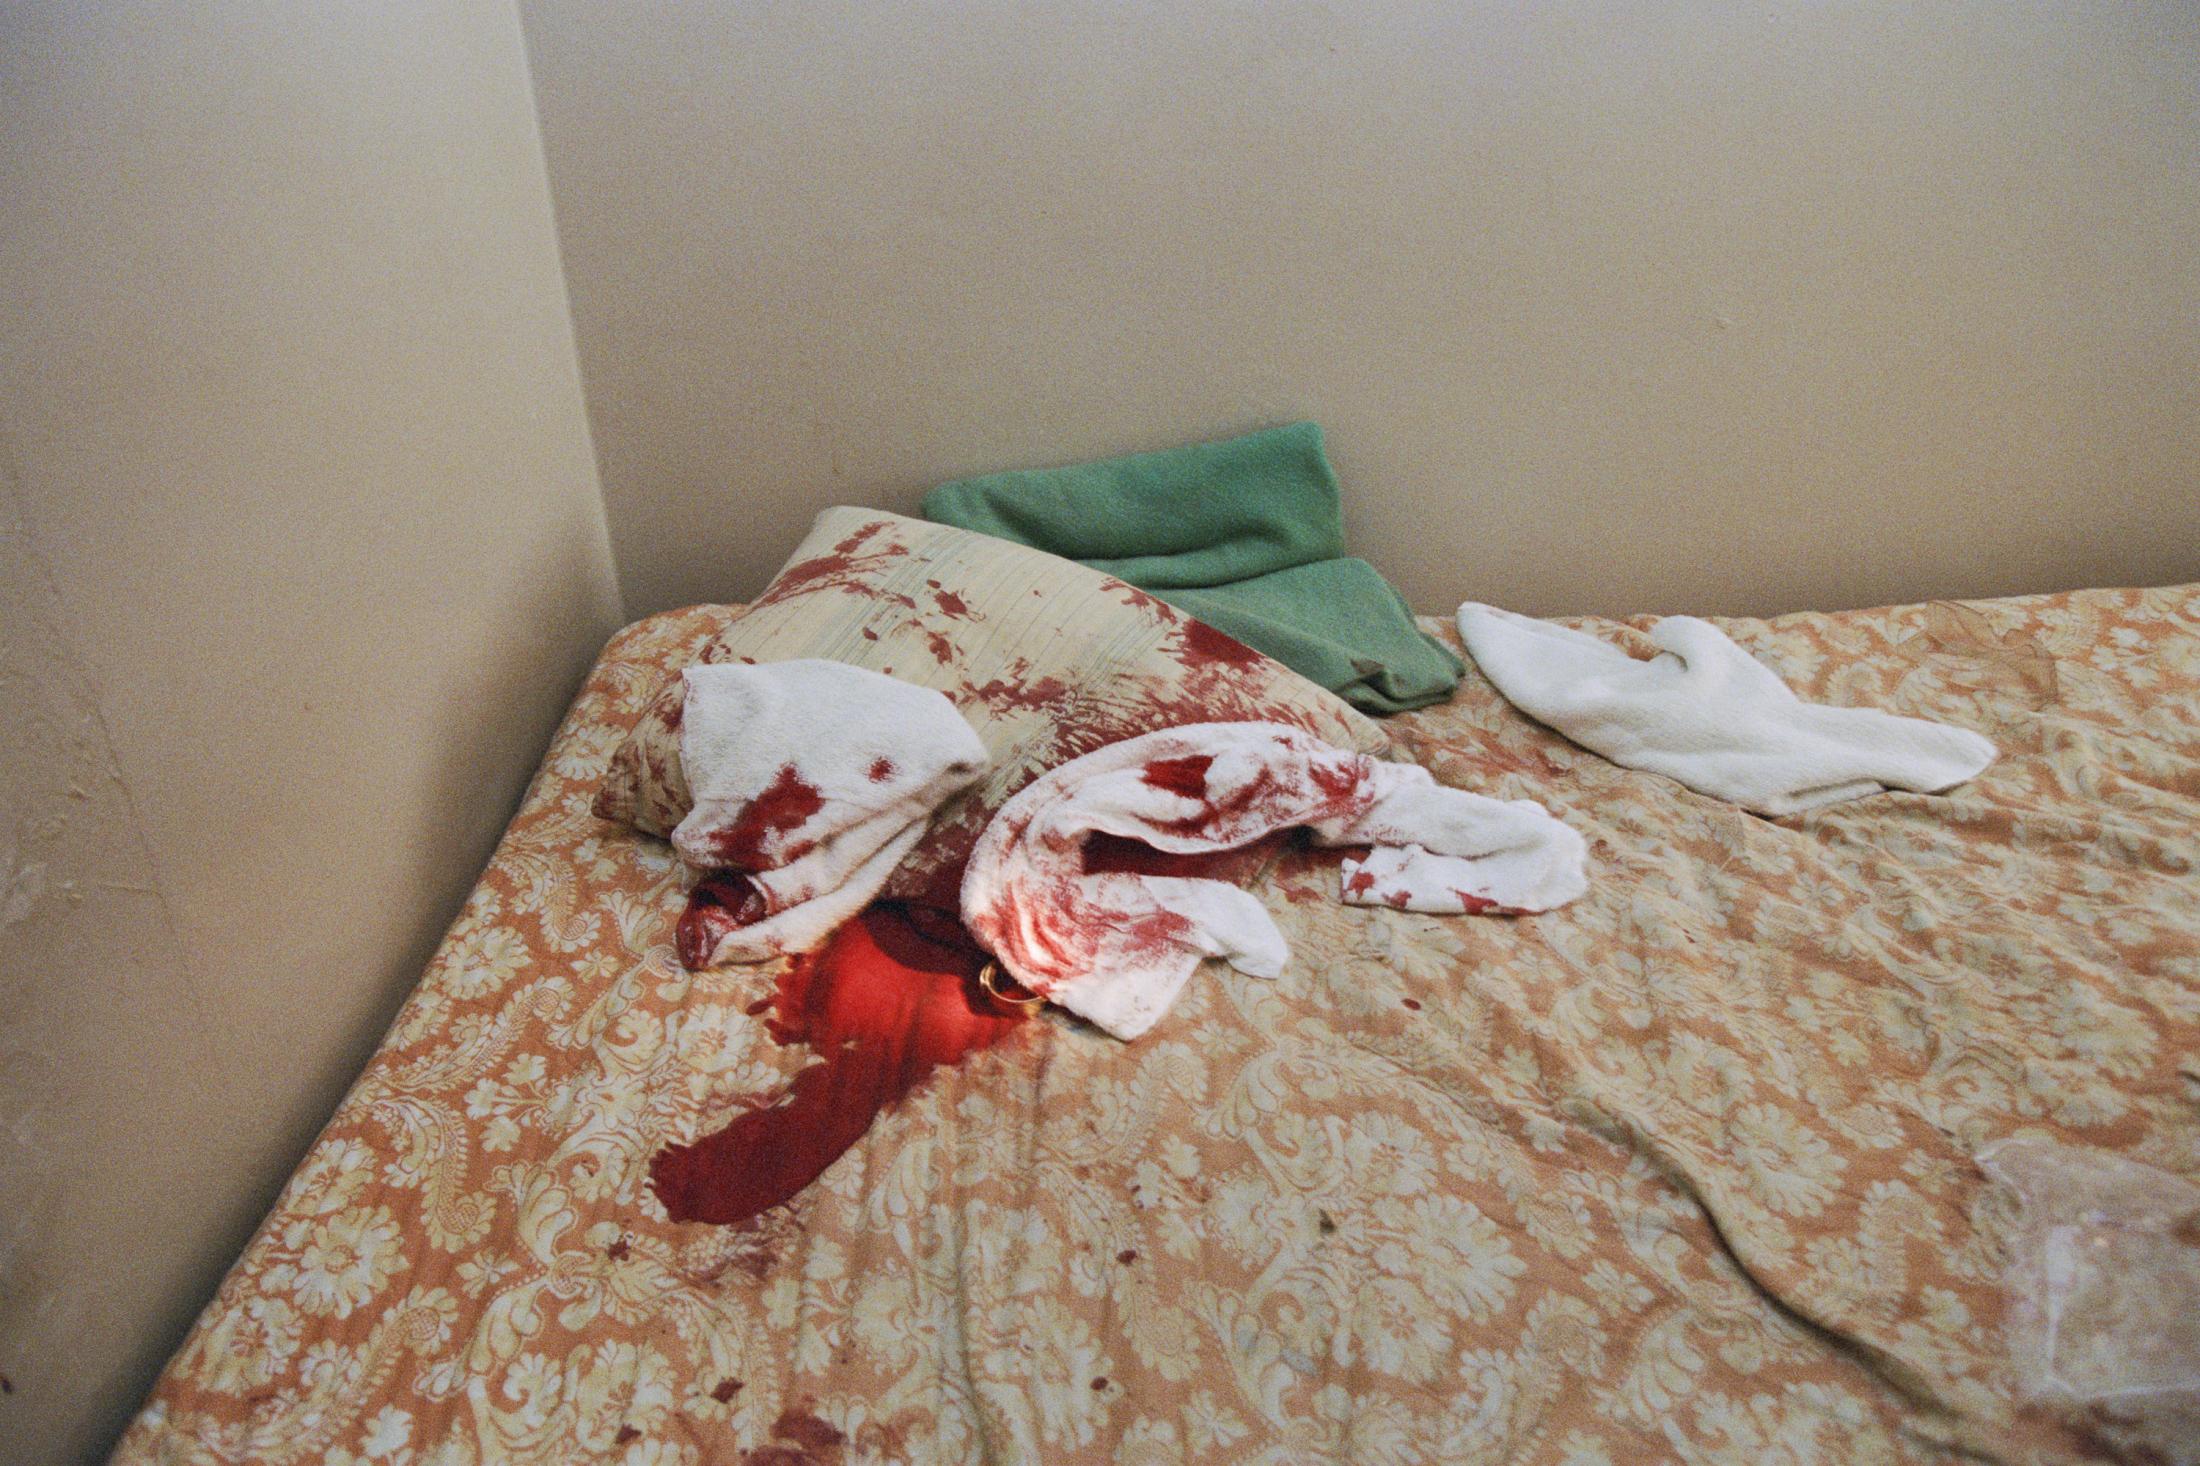 Archives of Abuse - Aftermath in hotel. San Francisco, 1991.